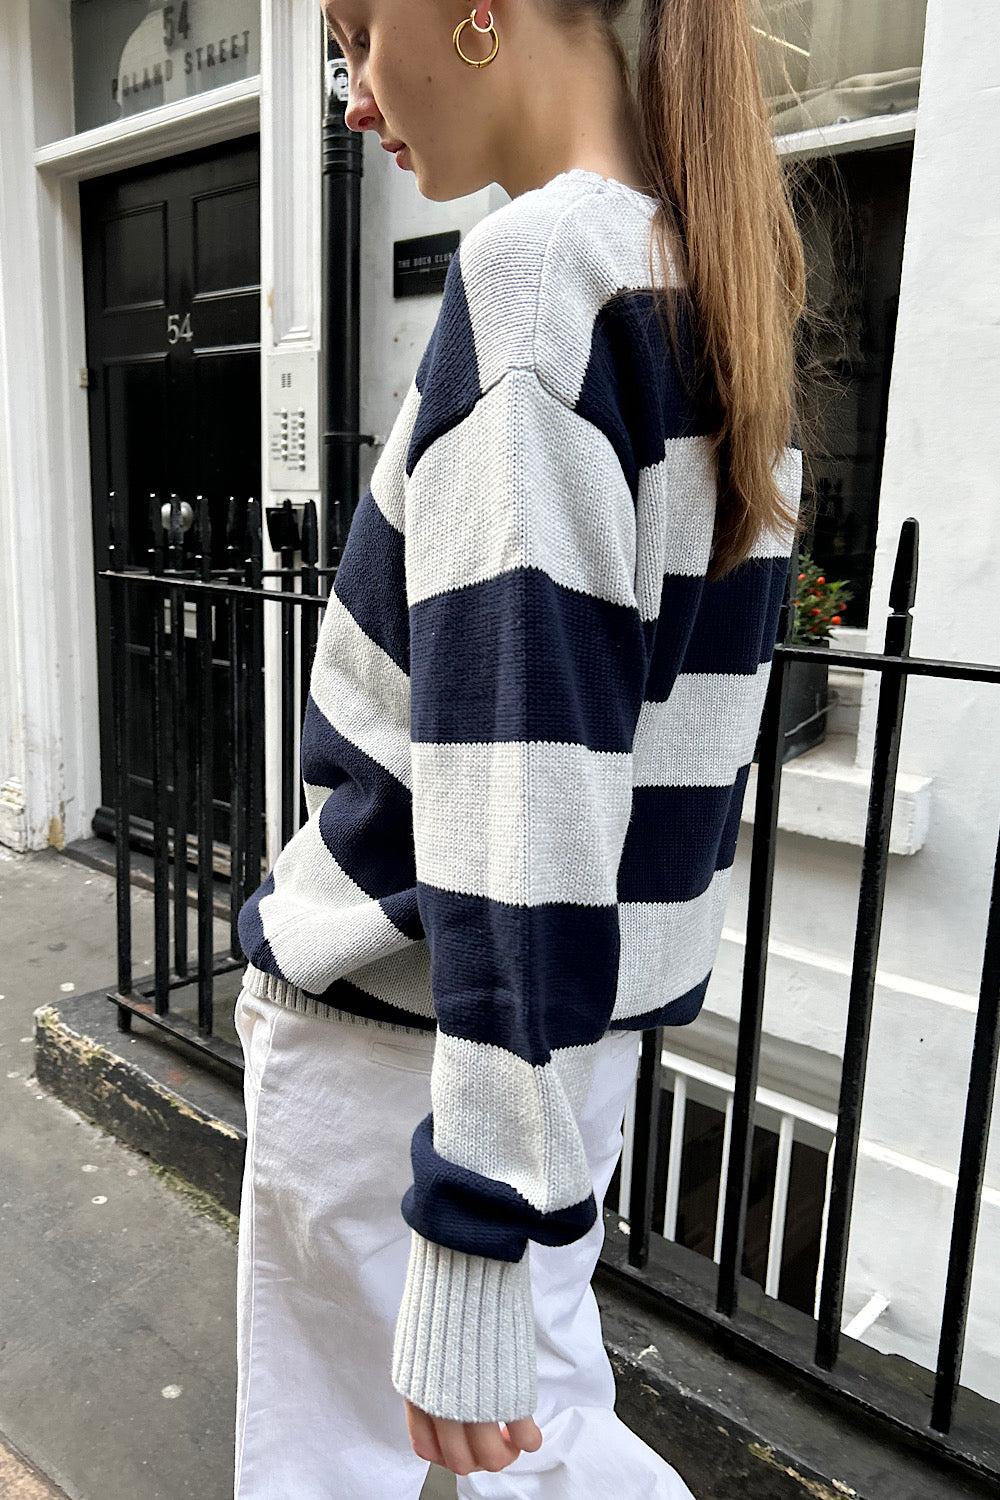 Silver Grey With Navy Blue Stripes / Oversized Fit